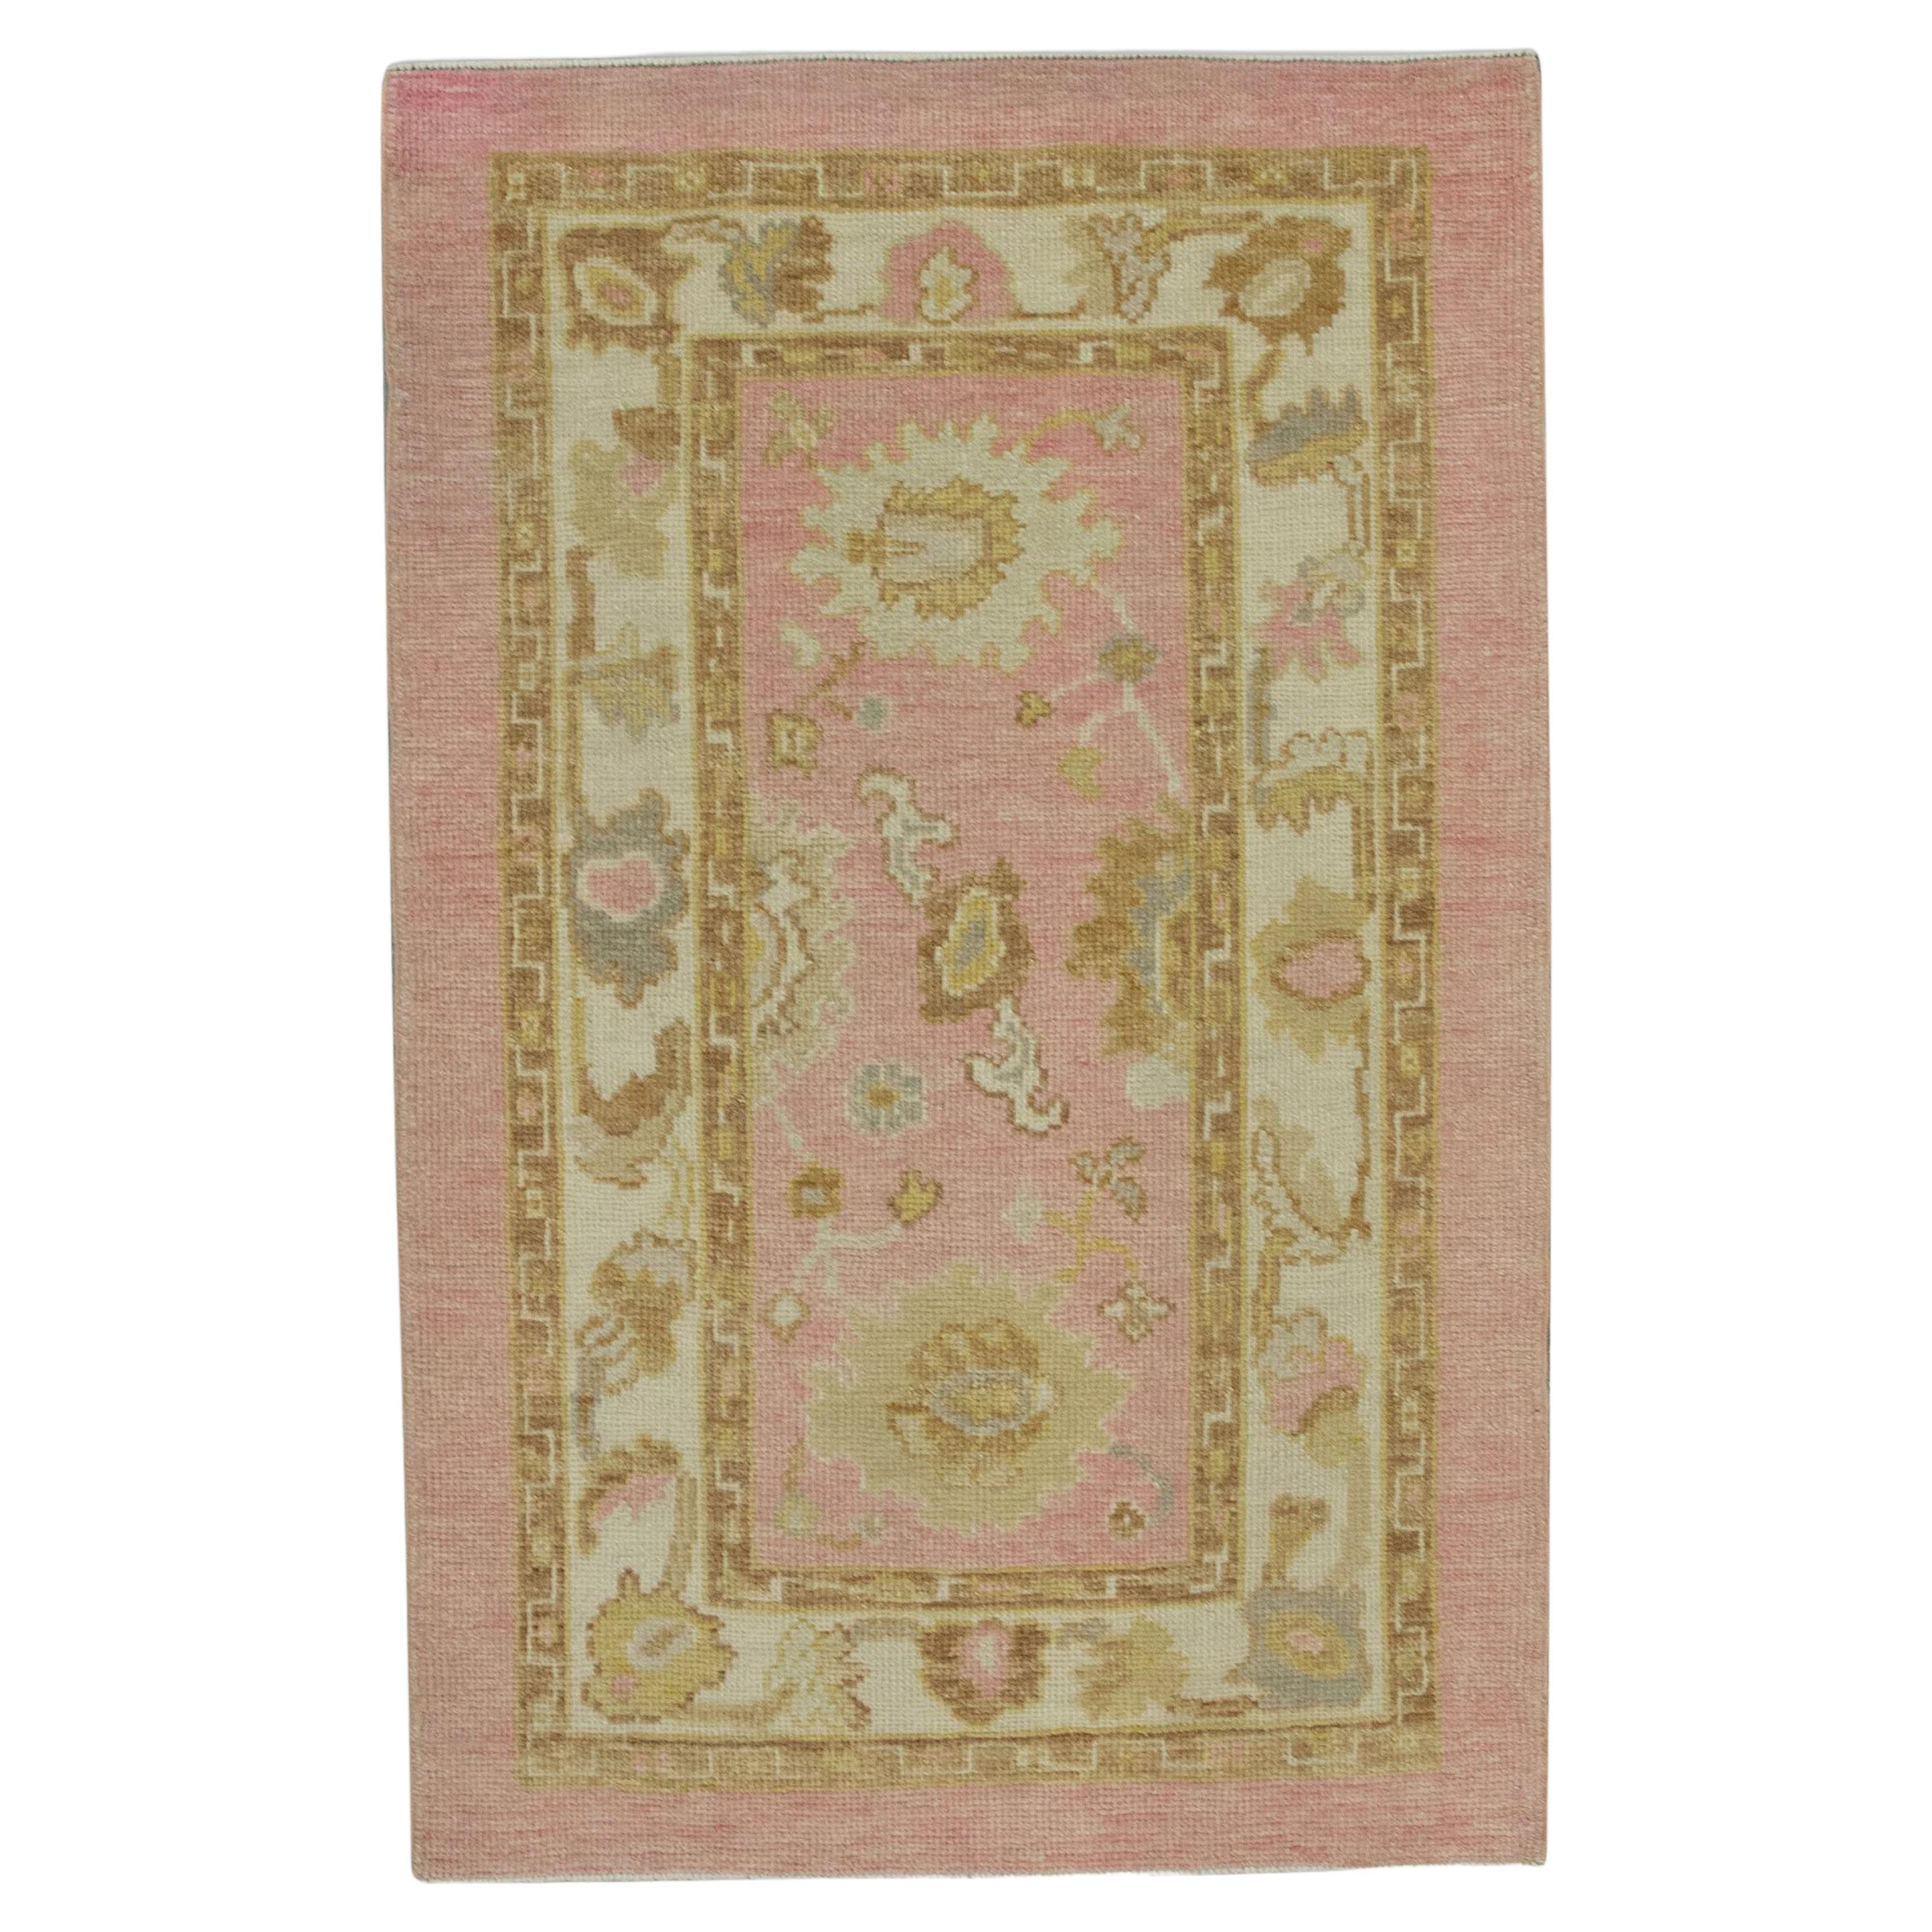 Pink & Yellow Floral Design Handwoven Wool Turkish Oushak Rug 3' x 4'6" For Sale